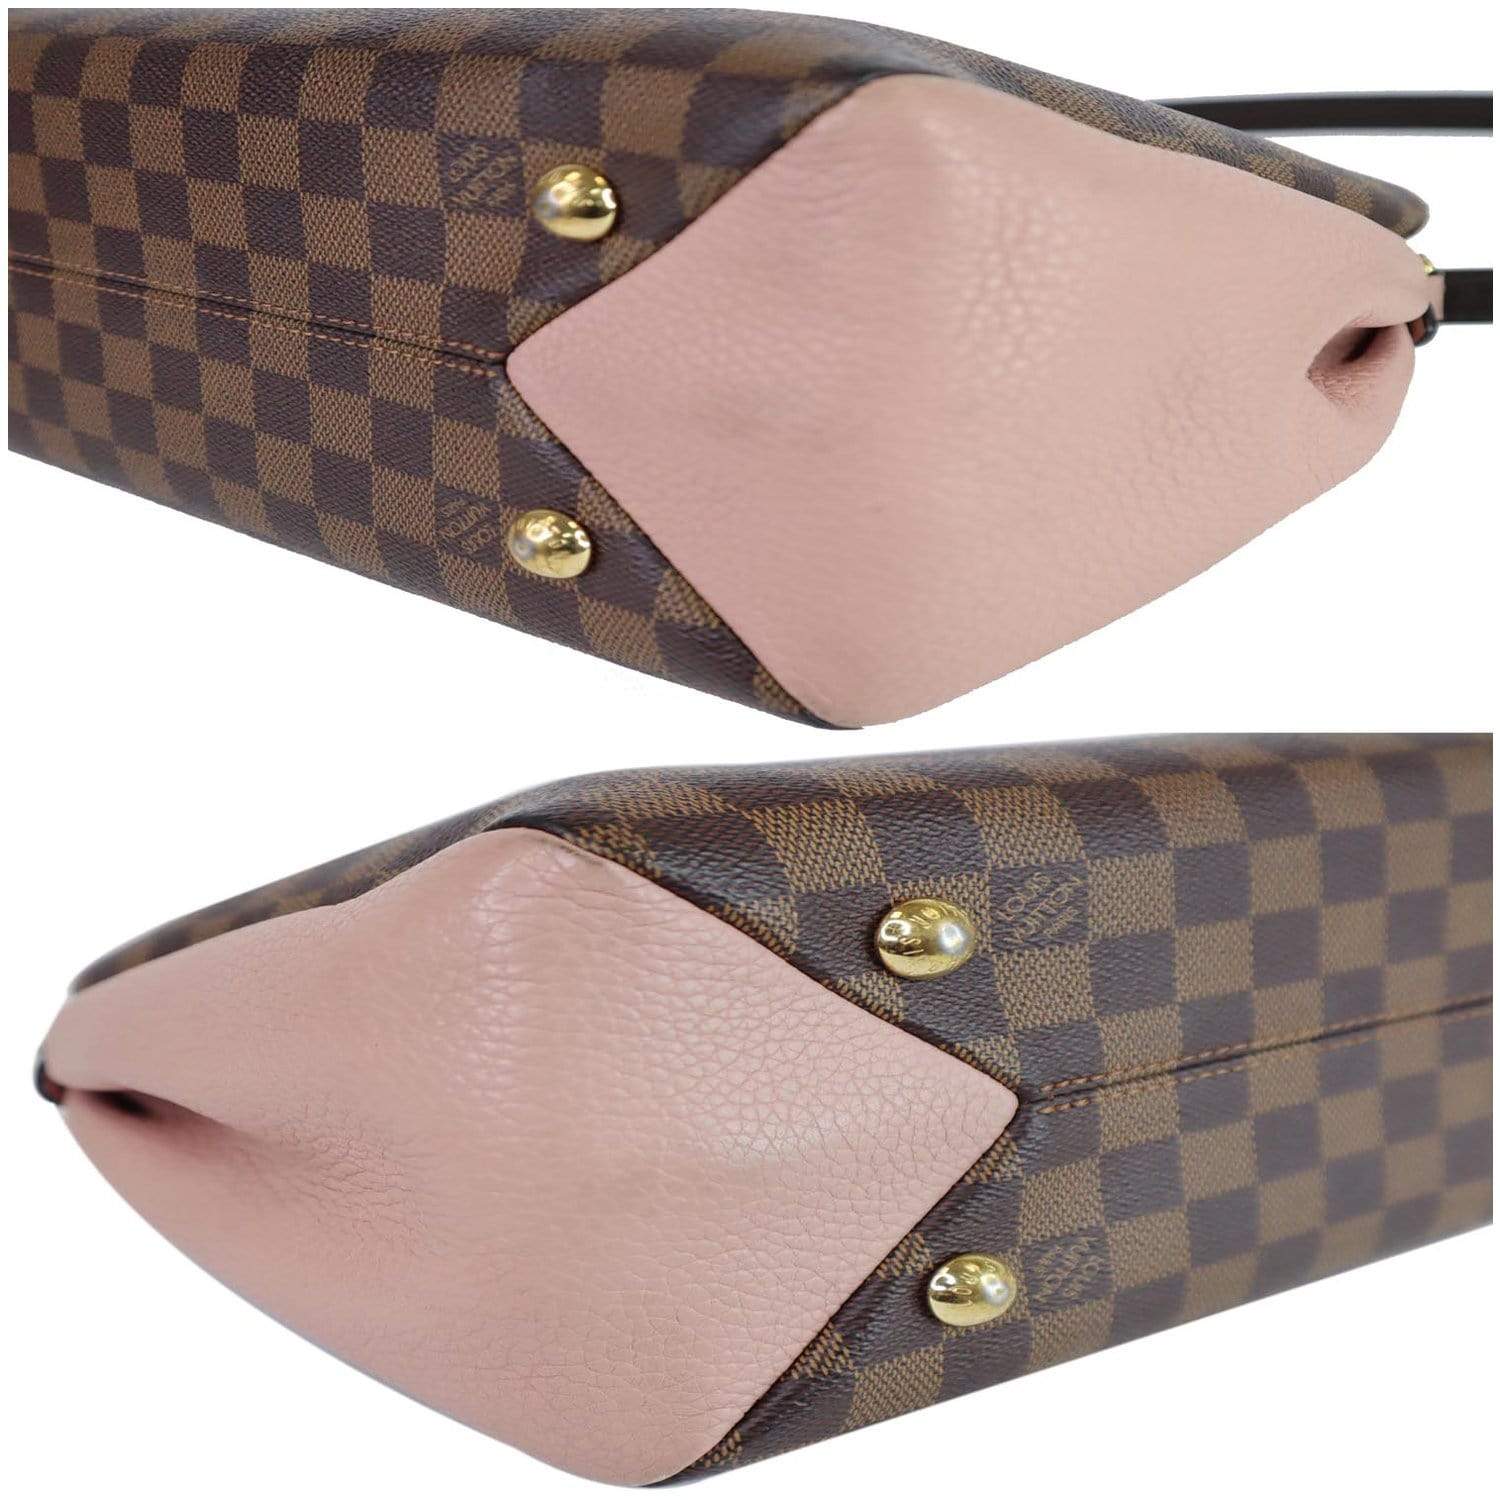 Authentic Louis Vuitton Damier Ebene Canvas With Pink Leather Brittany Bag